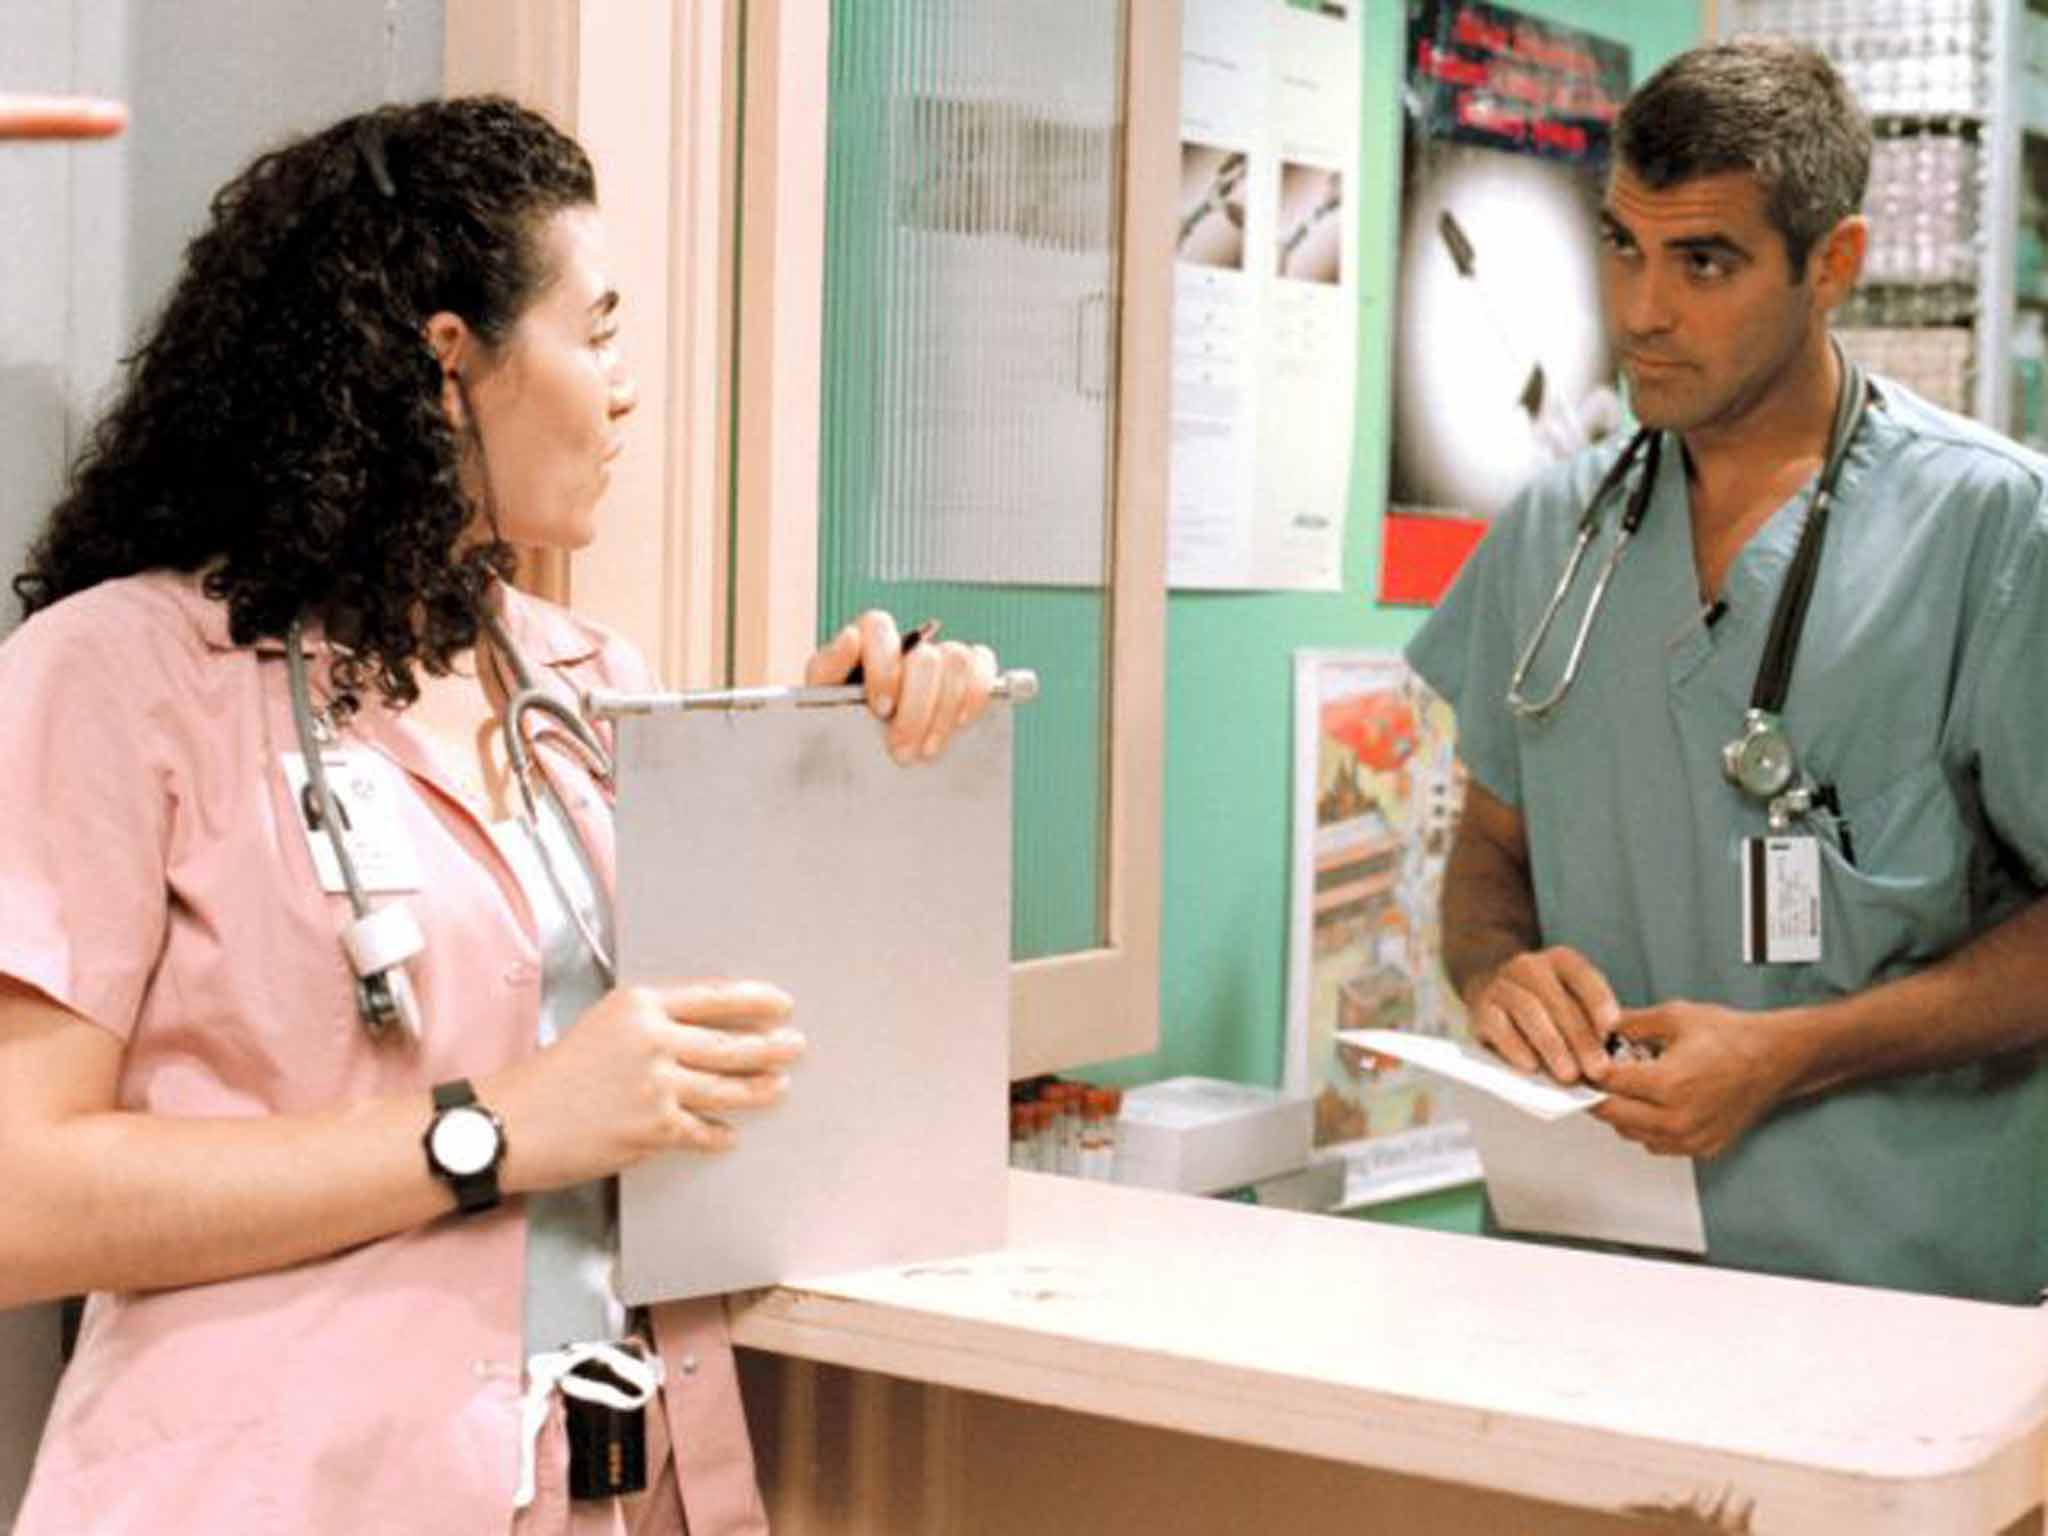 Scrubs up well: George Clooney in 'ER' (NBC)